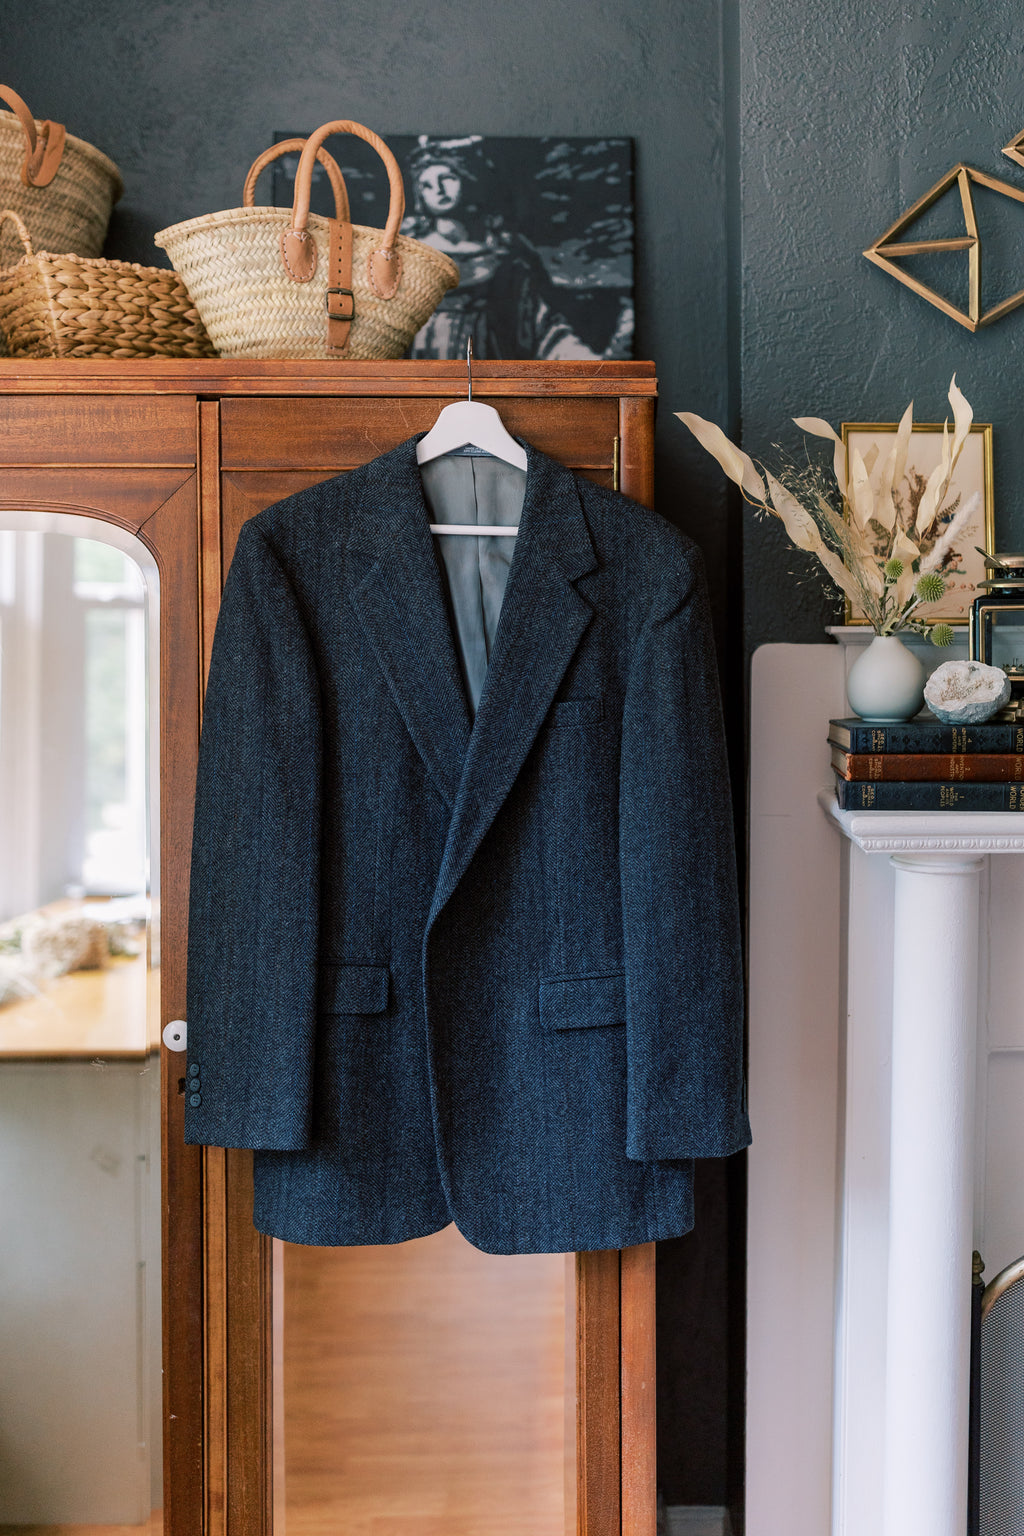 Made in the USA Men's Wool Blazer